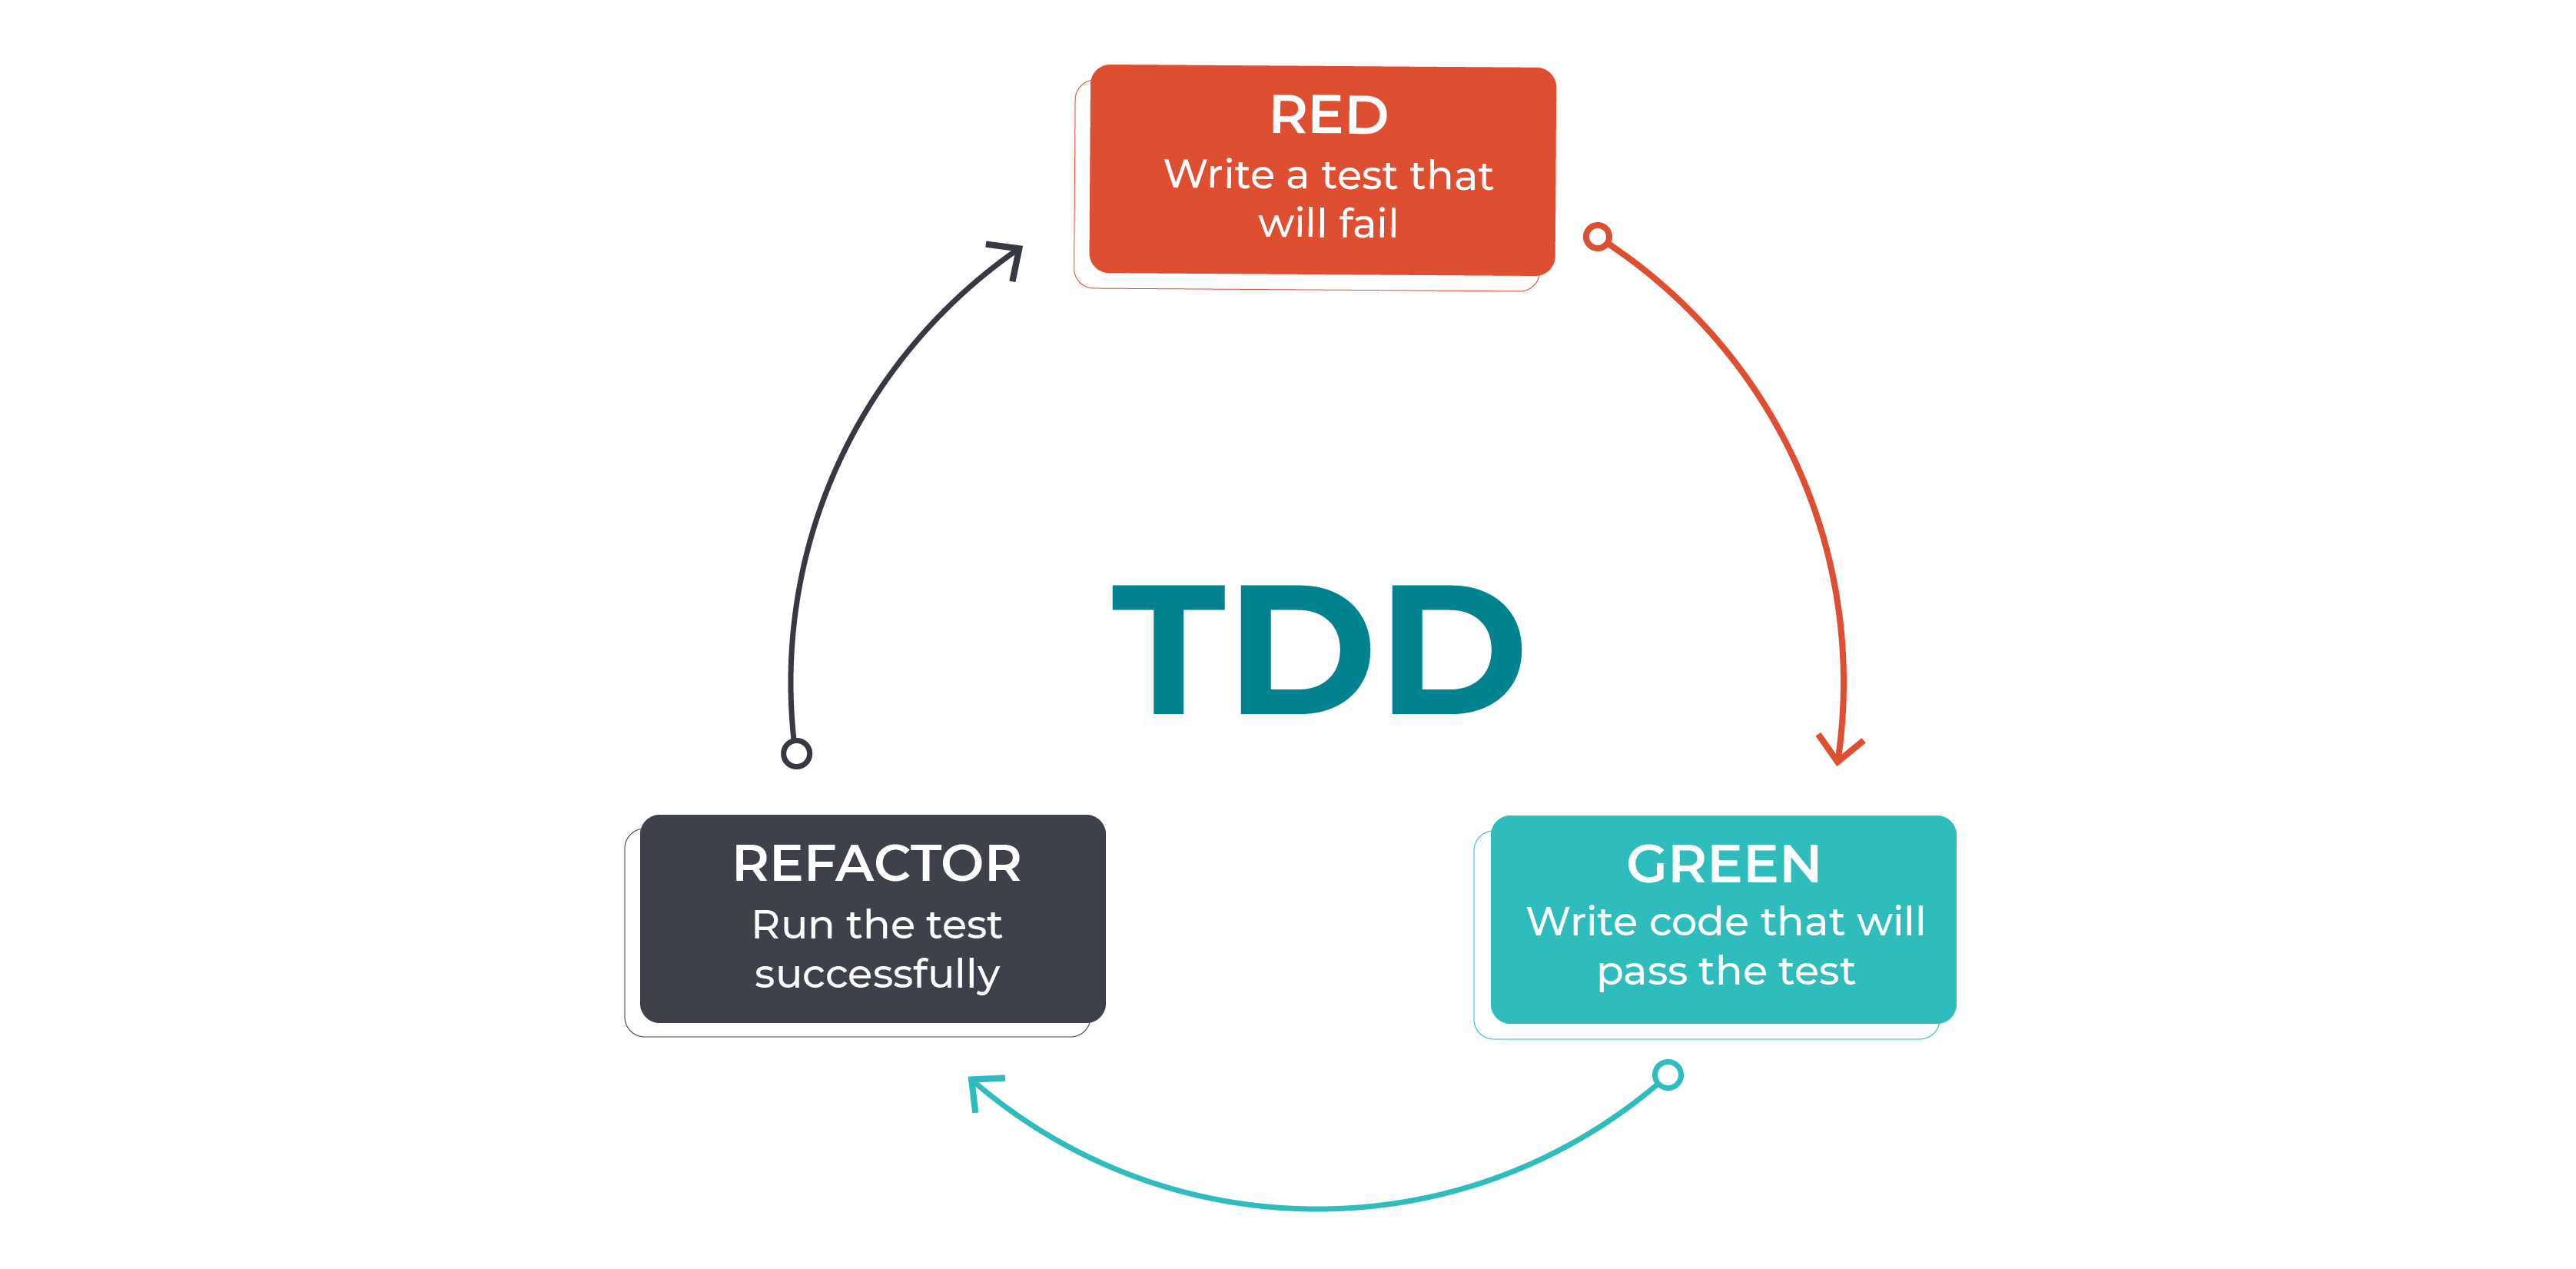 Test-Driven Development consists of 3 phases : RED, write a test that will fail ; GREEN, write source code that will pass the test ; REFACTOR, improve the source code.